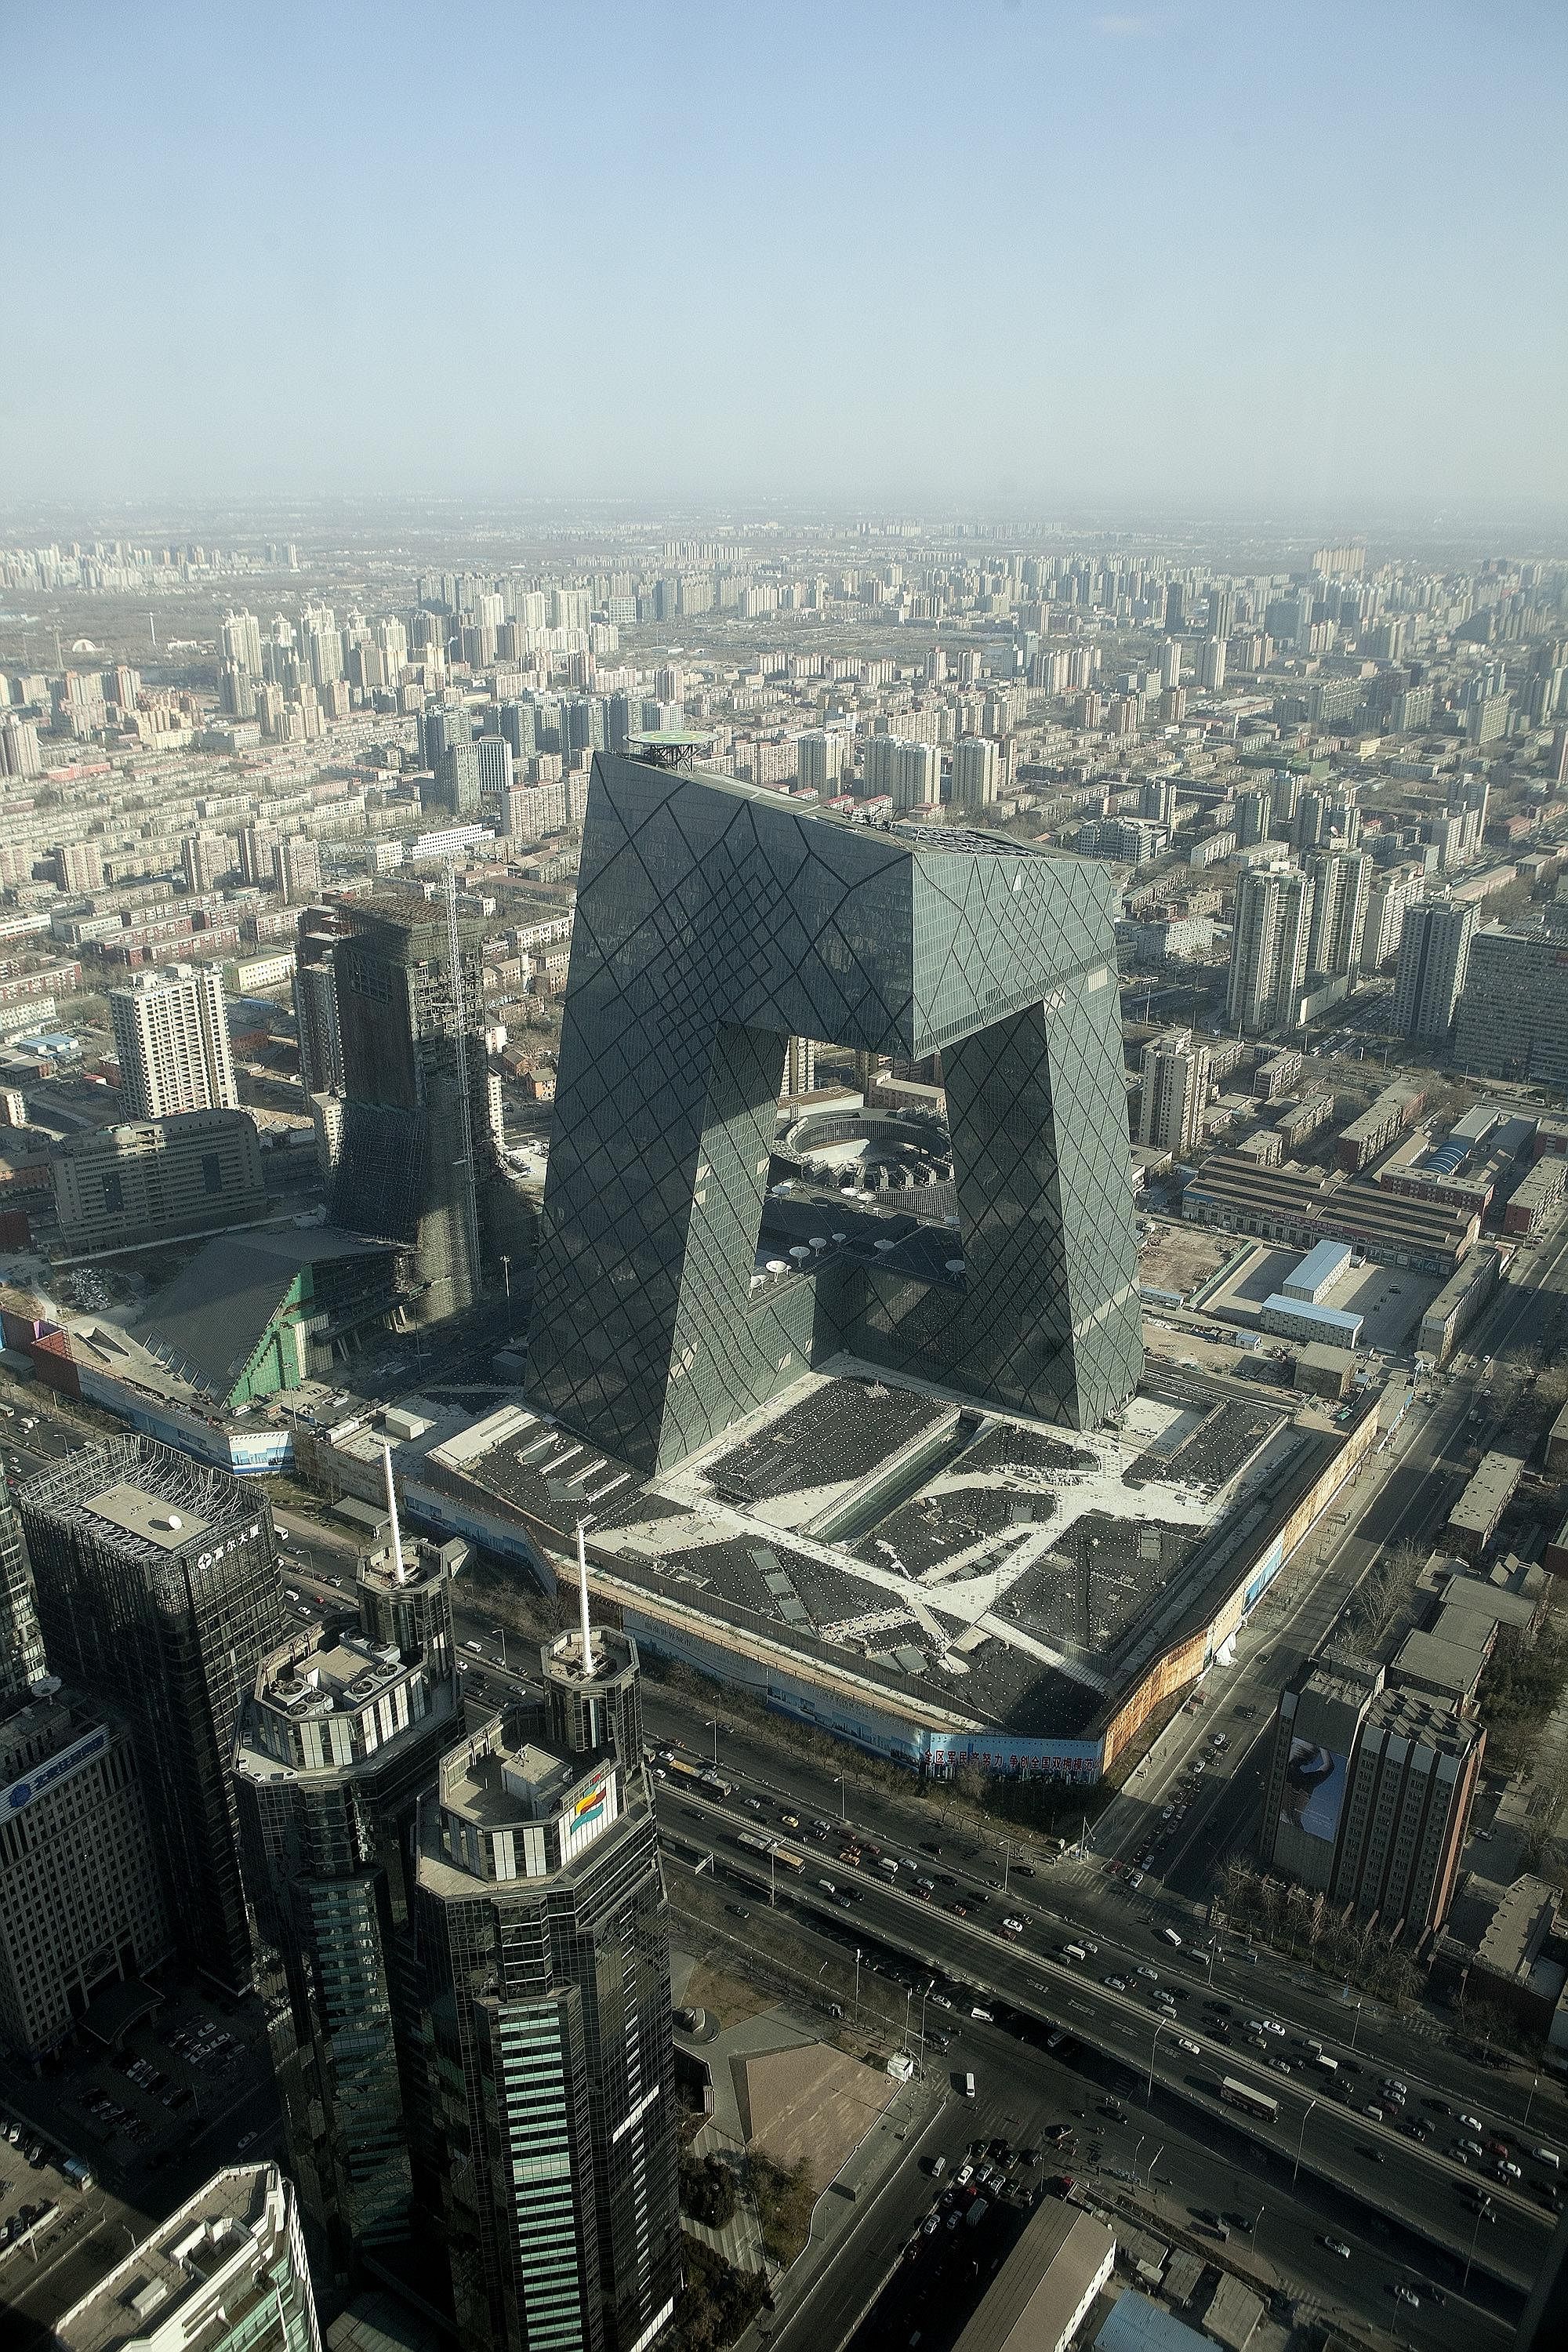 The China Central Television, or CCTV, Tower in Beijing. The wedge-shaped "Termite's Nest" building was damaged by a fire in 2009.